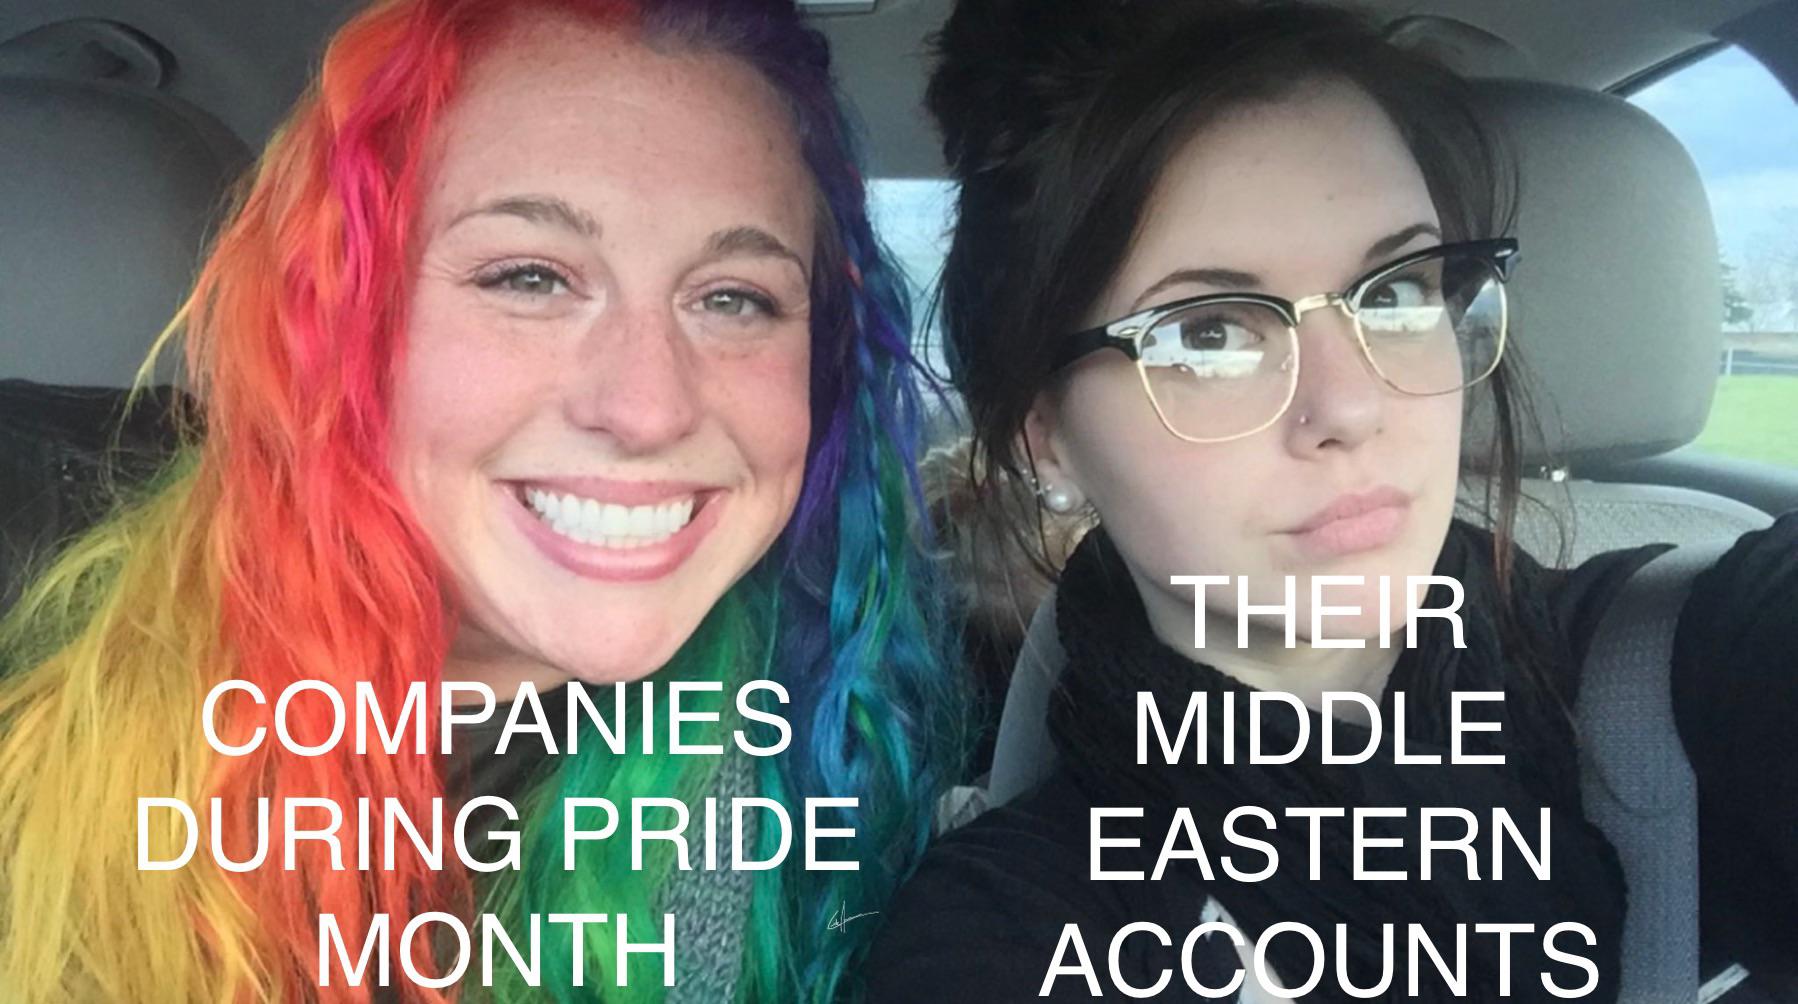 dank memes - funny memes - rainbow girl and goth girl meme template - Companies During Pride Month Their Middle Eastern Accounts